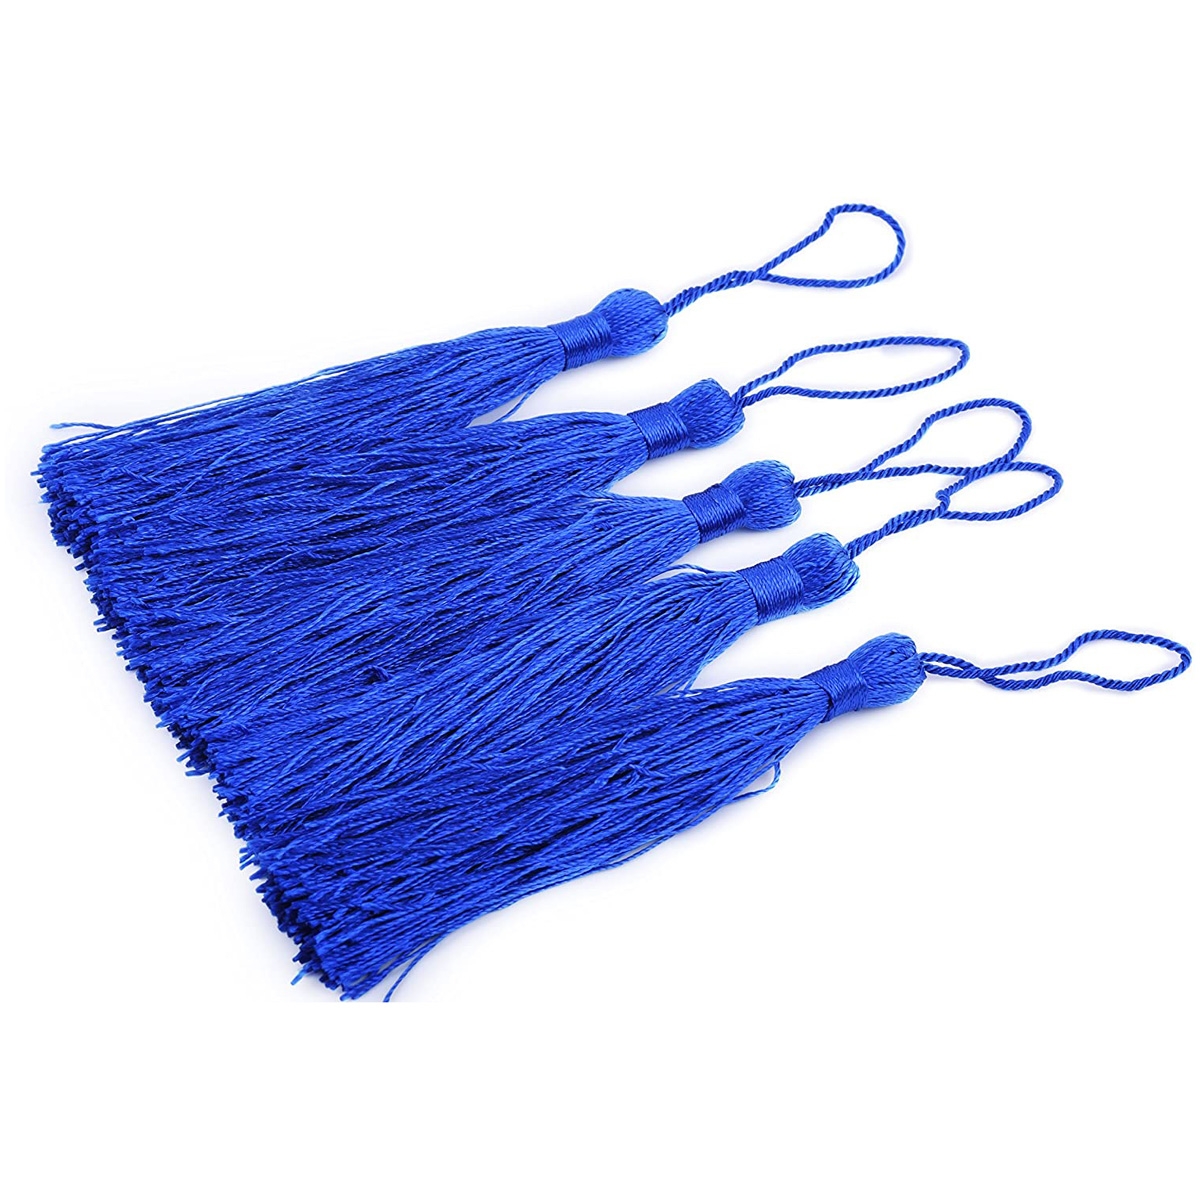 Soft Craft Mini Tassels with Loops for Bookmarks Jewelry Making, Decoration DIY Projects (Royal Blue